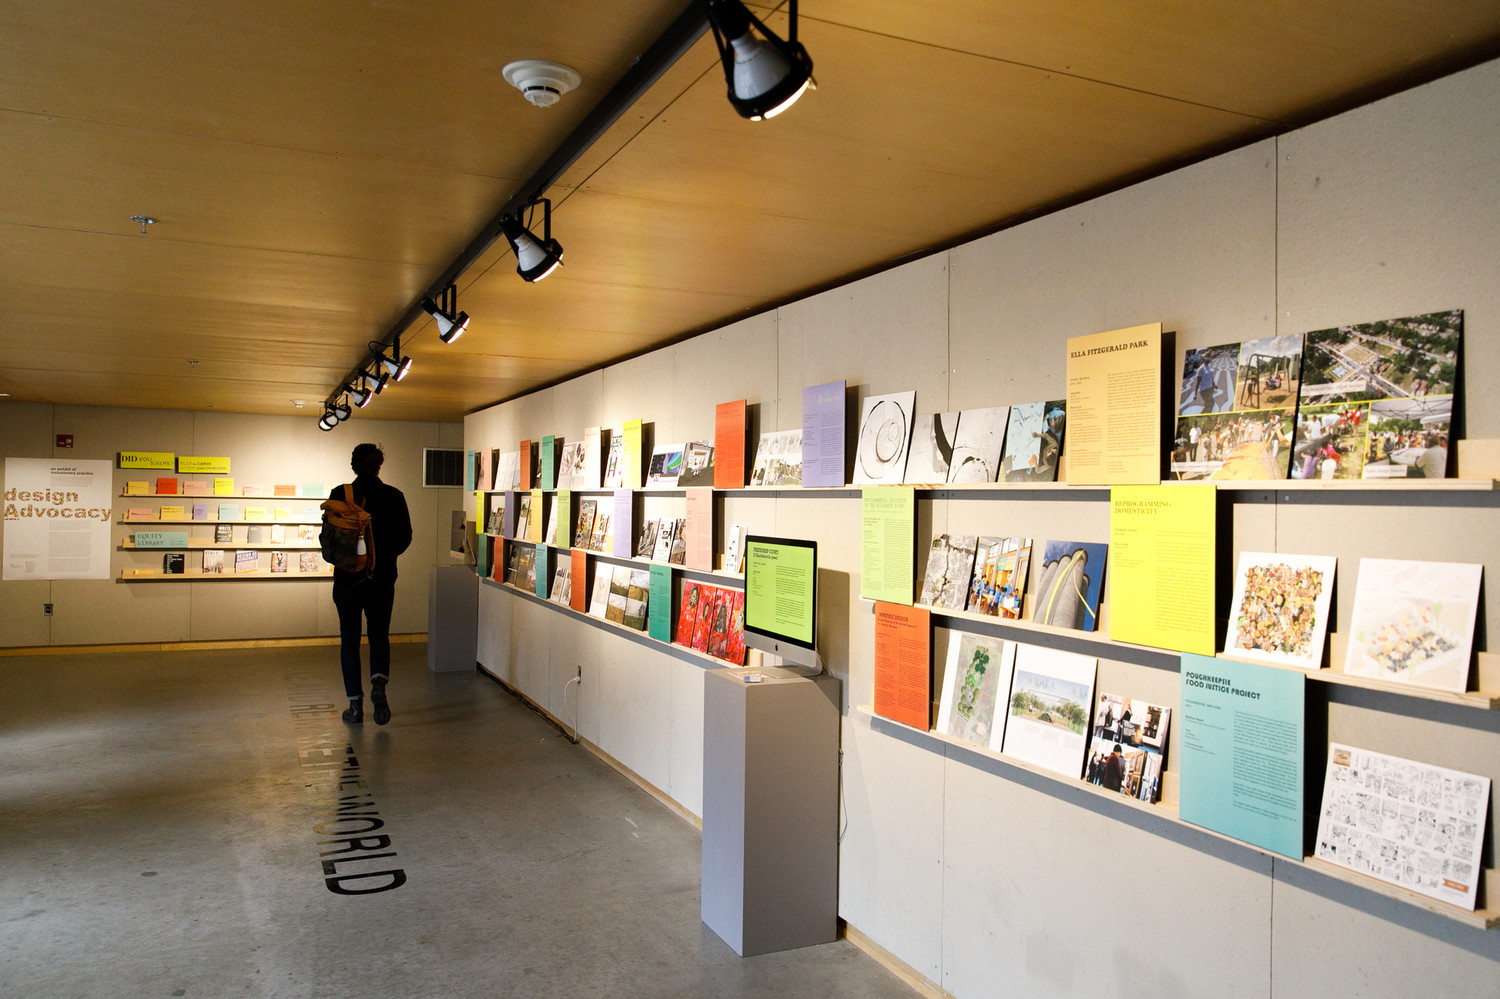 Design Advocacy: An Exhibition of Inclusionary Practice curated by manifestA, in partnership with NOMAS and the UVA School of Architecture Inclusion and Equity Committee, features the work of current students, faculty and alumni focused on diverse forms of spatial and cultural advocacy.